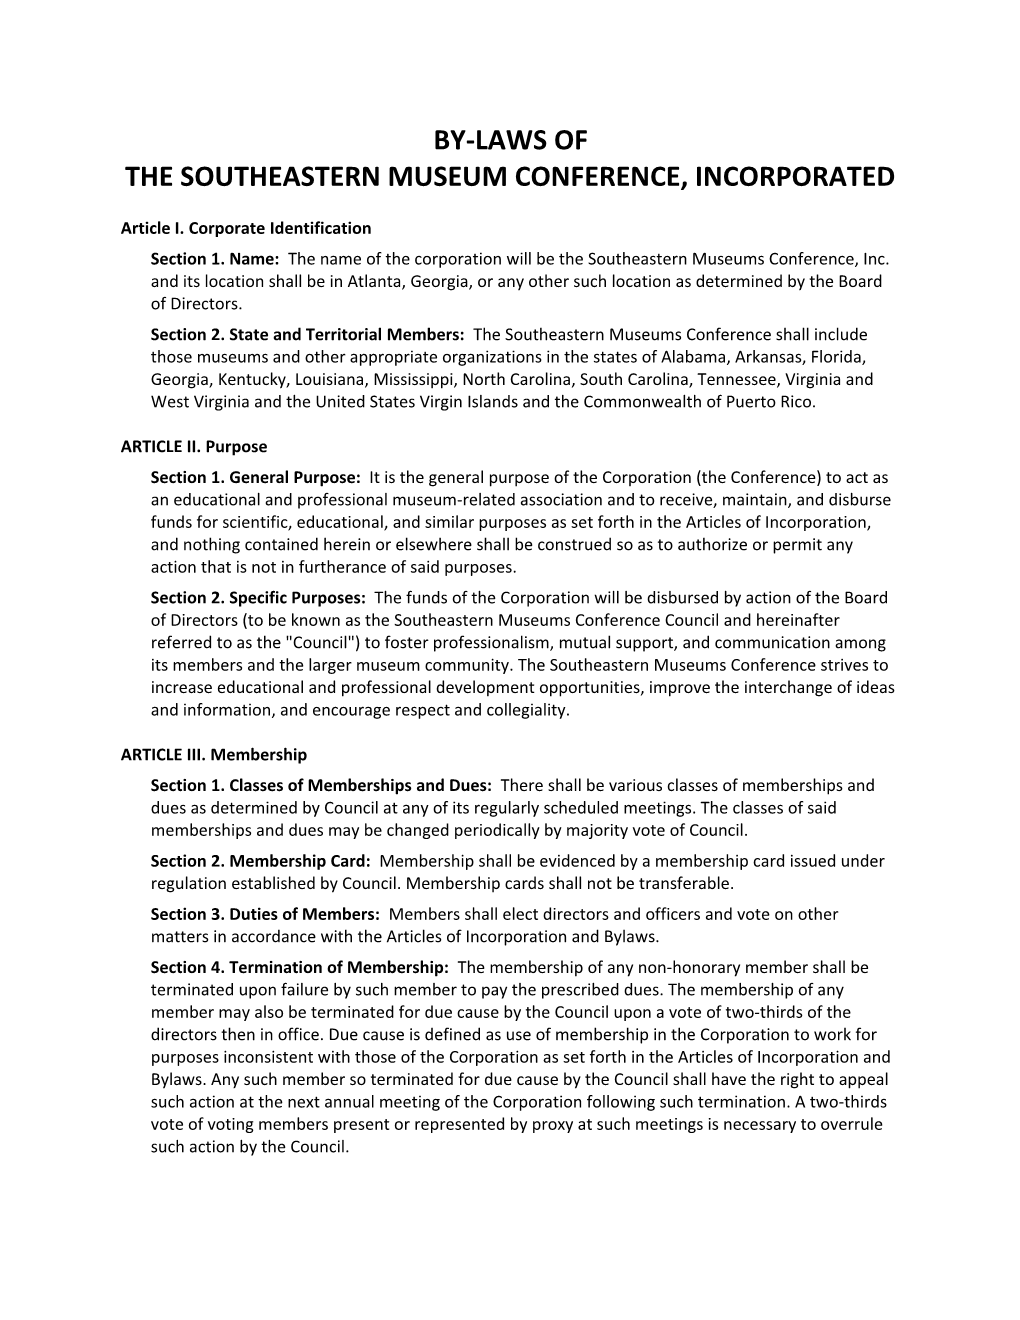 The Southeastern Museum Conference, Incorporated